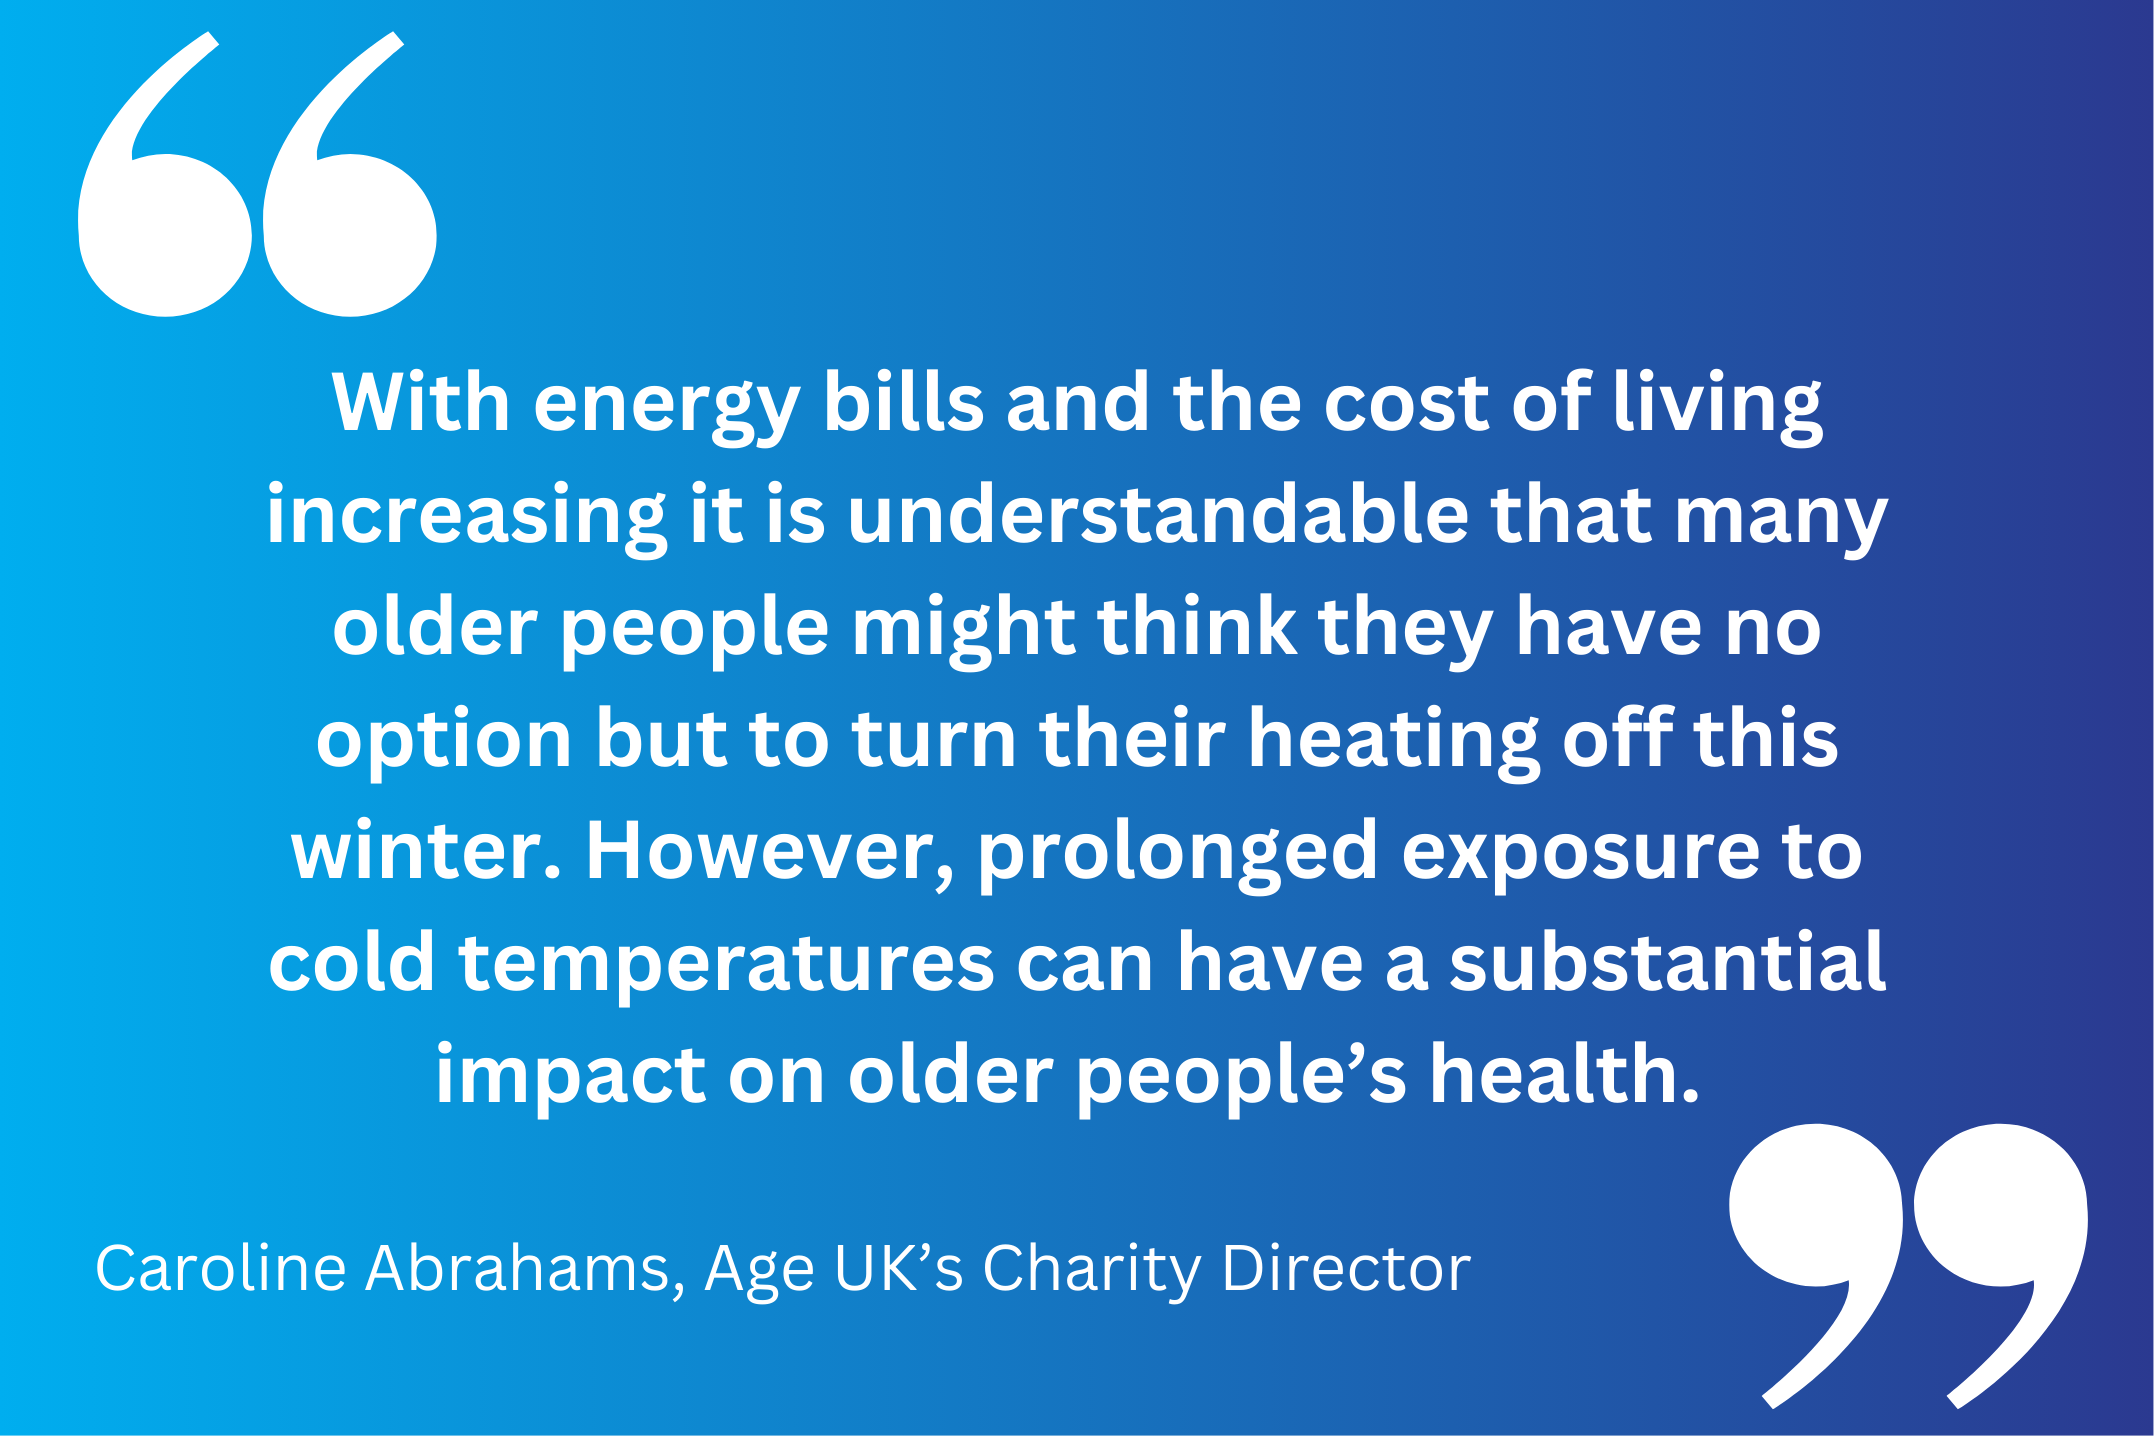 “With energy bills and the cost of living increasing it is understandable that many older people might think they have no option but to turn their heating off this winter. However, prolonged exposure to cold temperatures can have a substantial impact on older people’s health. 